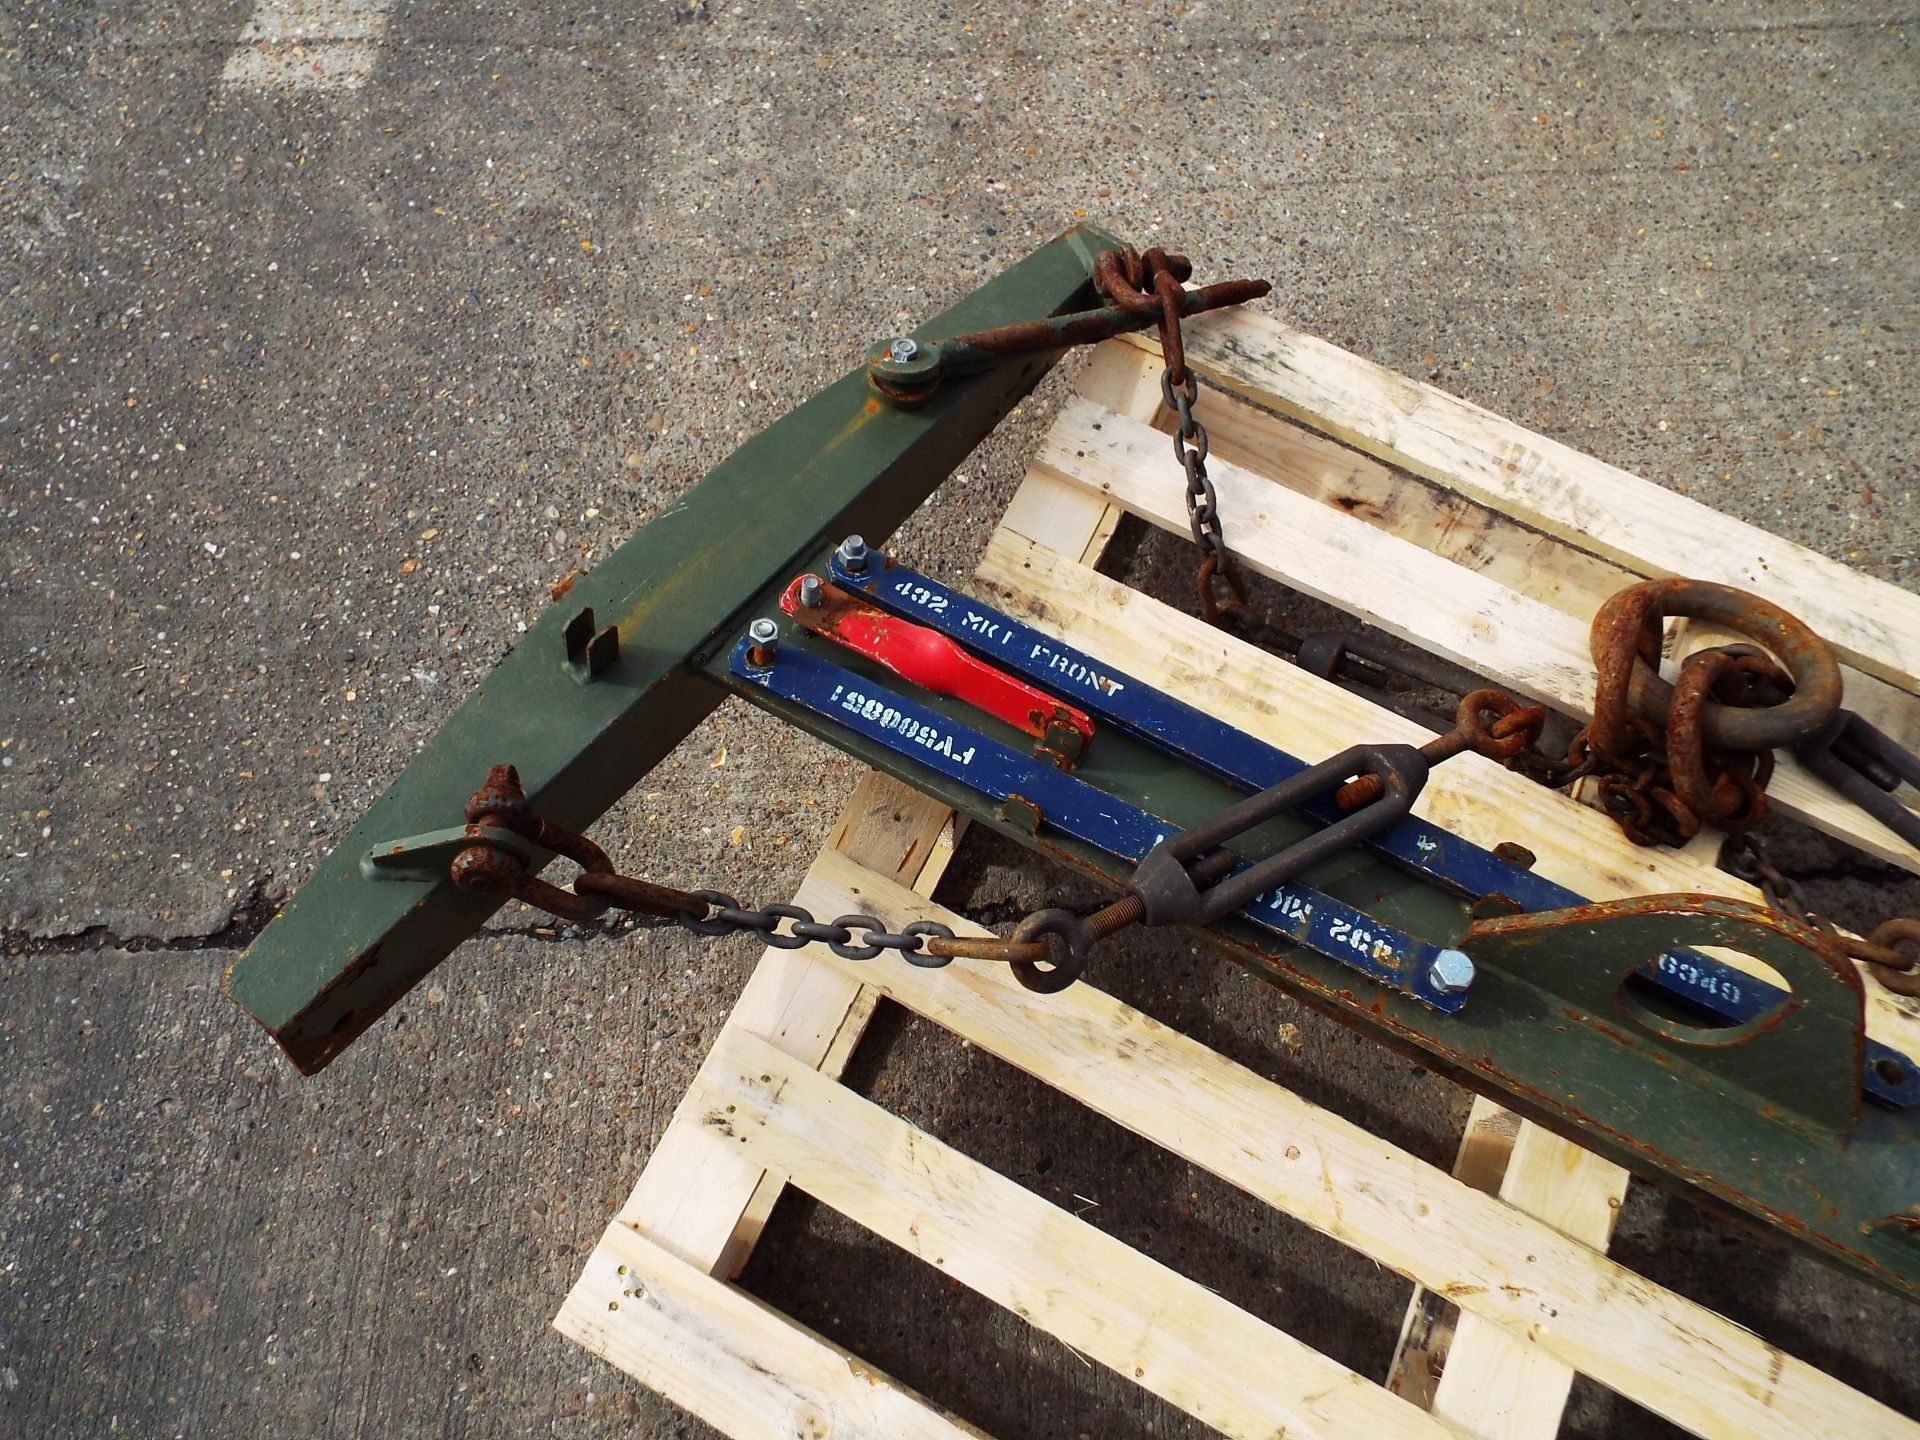 Extremely Rare Original FV432 Pack Lifting Frame with Attachments - Image 2 of 6